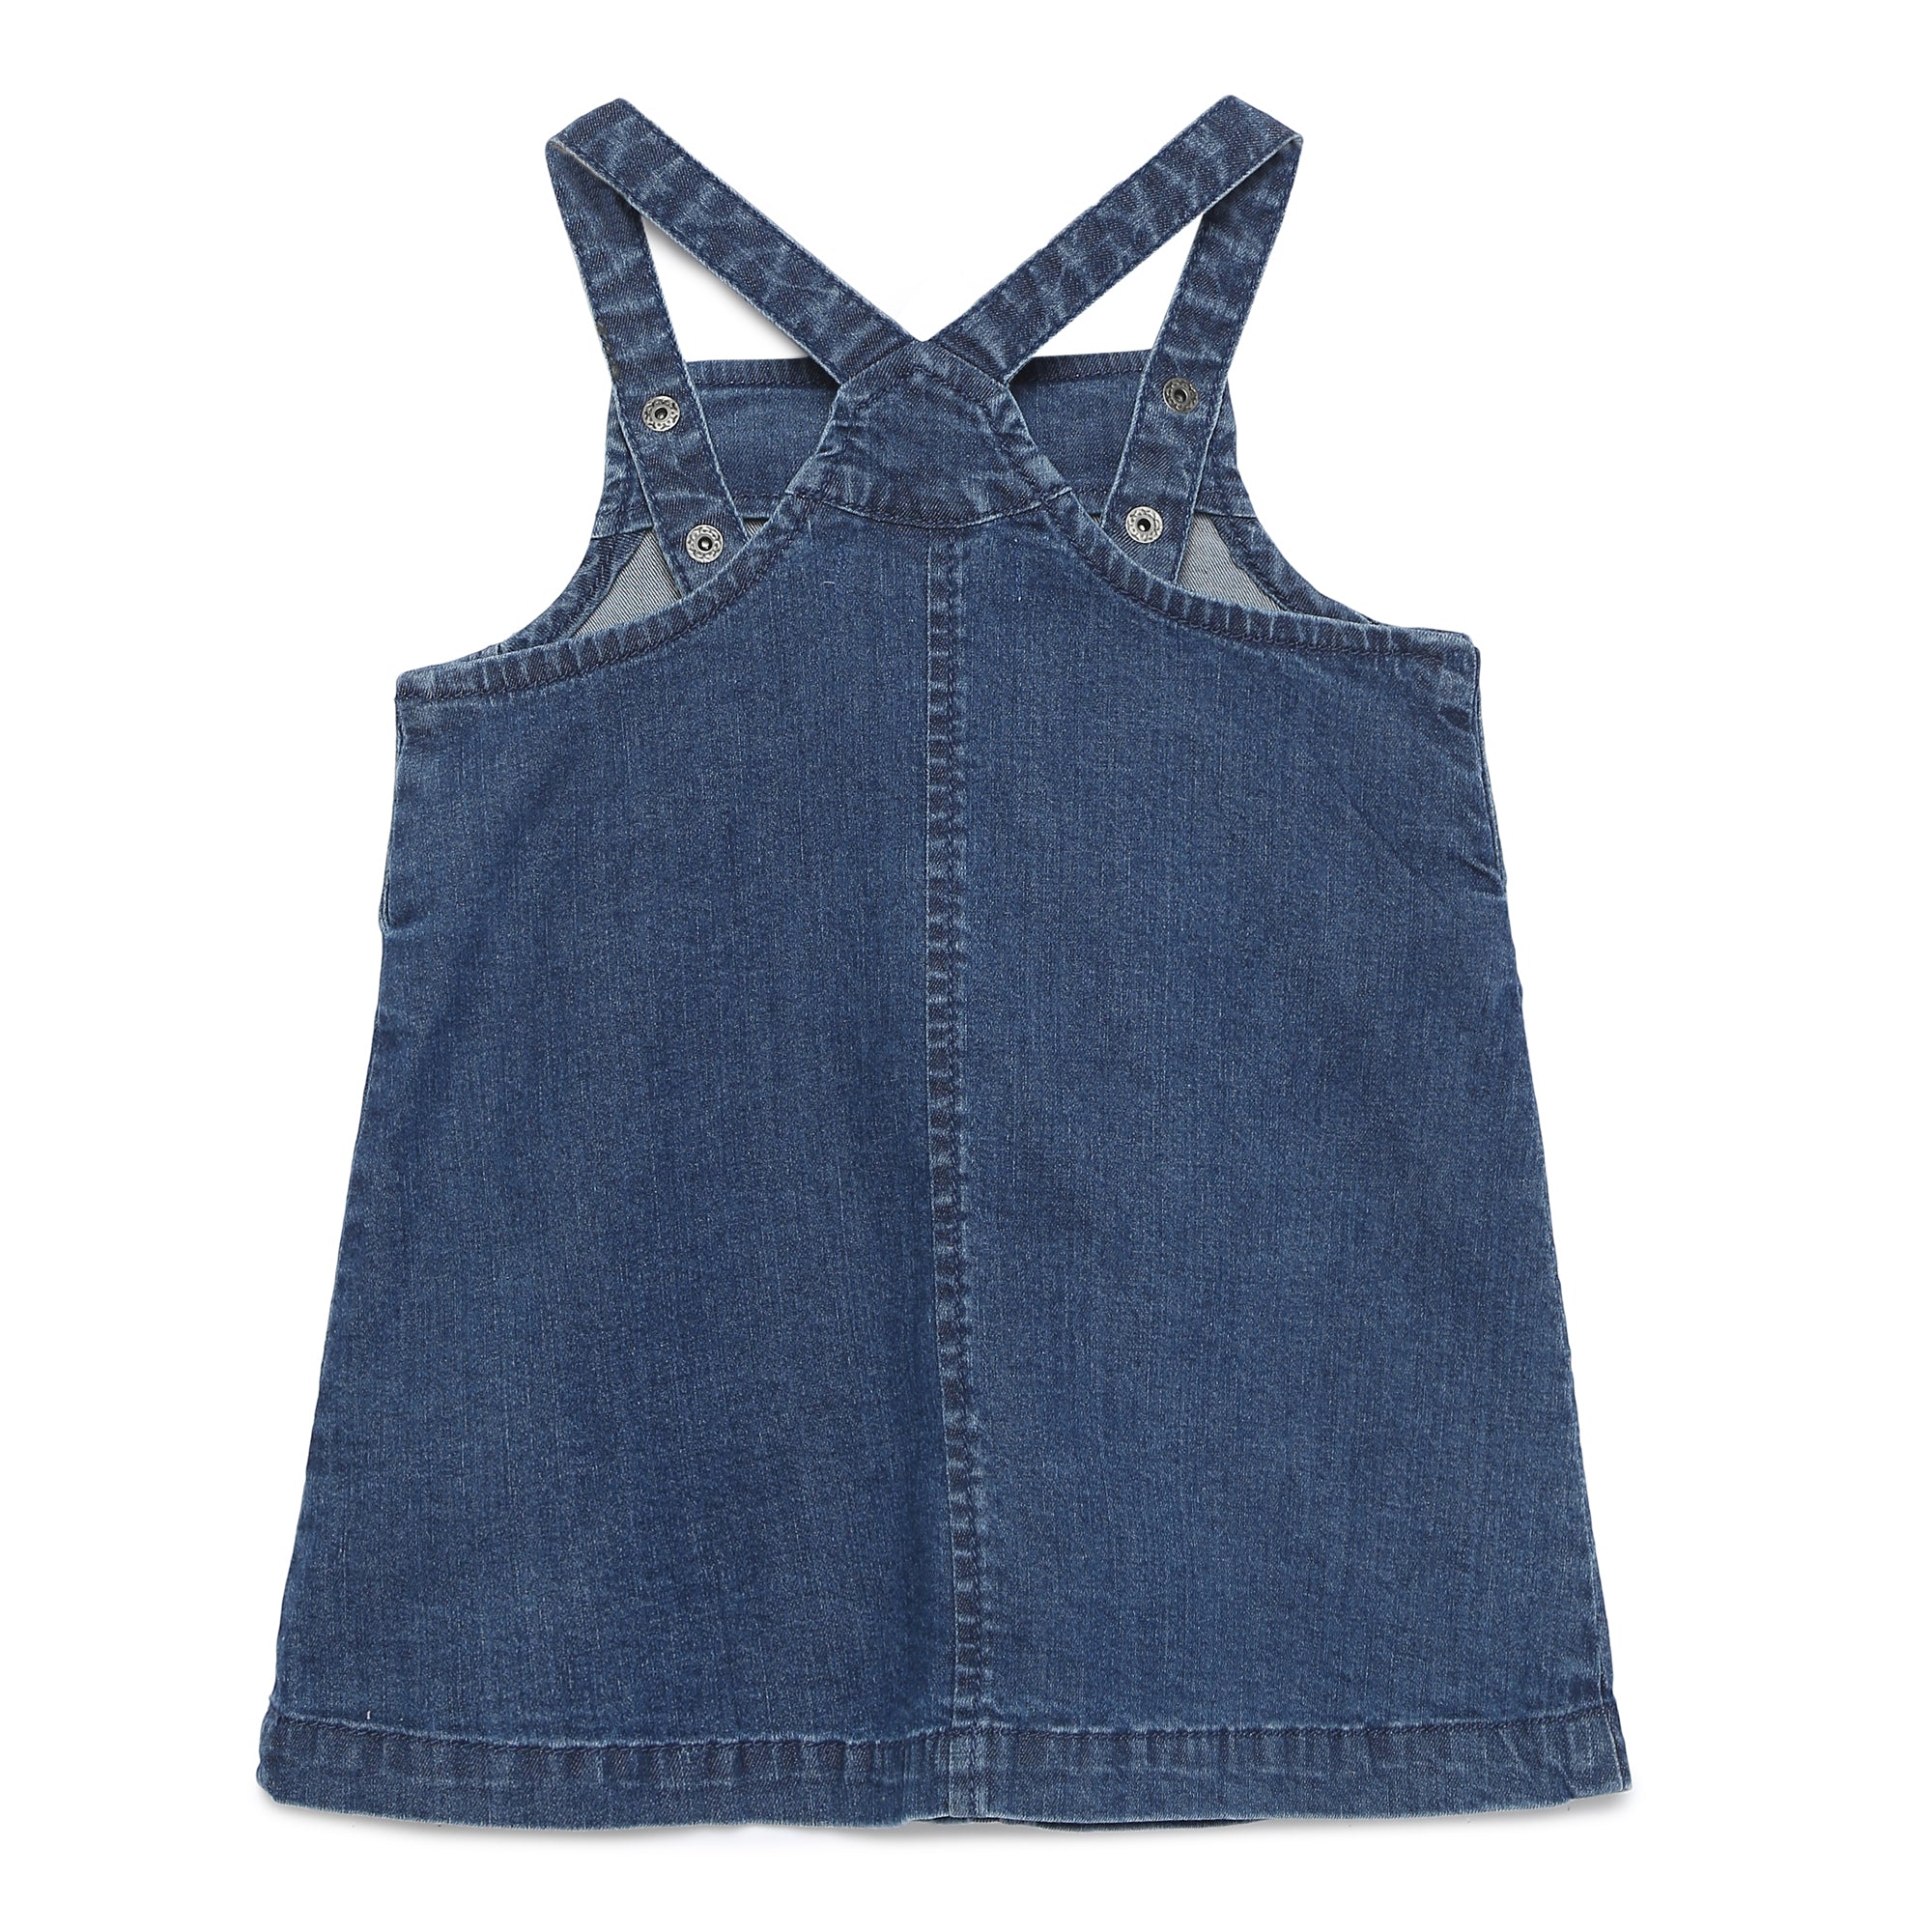 Naughty Ninos Girls Blue Embroidered Denim Fit and Flare Dress(MM00585DRS_Blue_3-4  Years) : Amazon.in: Clothing & Accessories